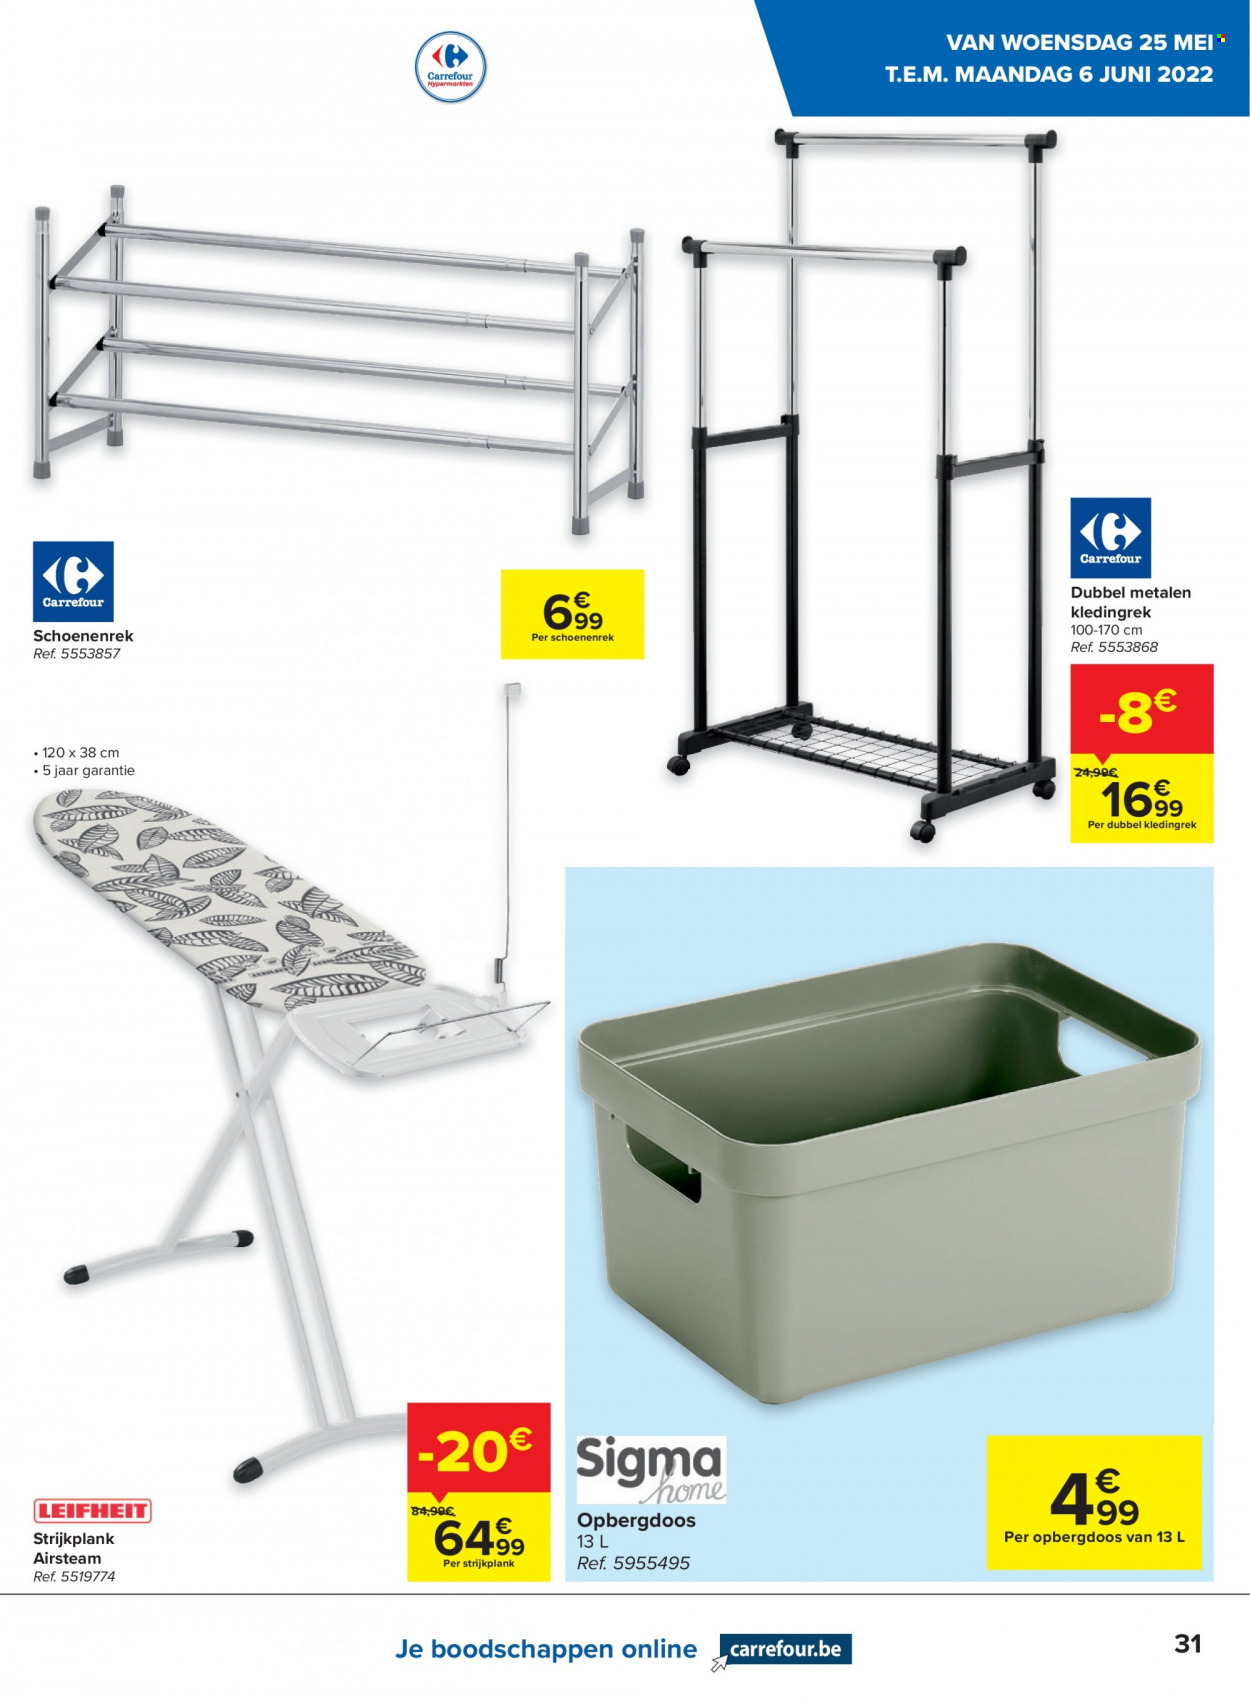 Catalogue Carrefour hypermarkt - 24.5.2022 - 30.5.2022. Page 31.